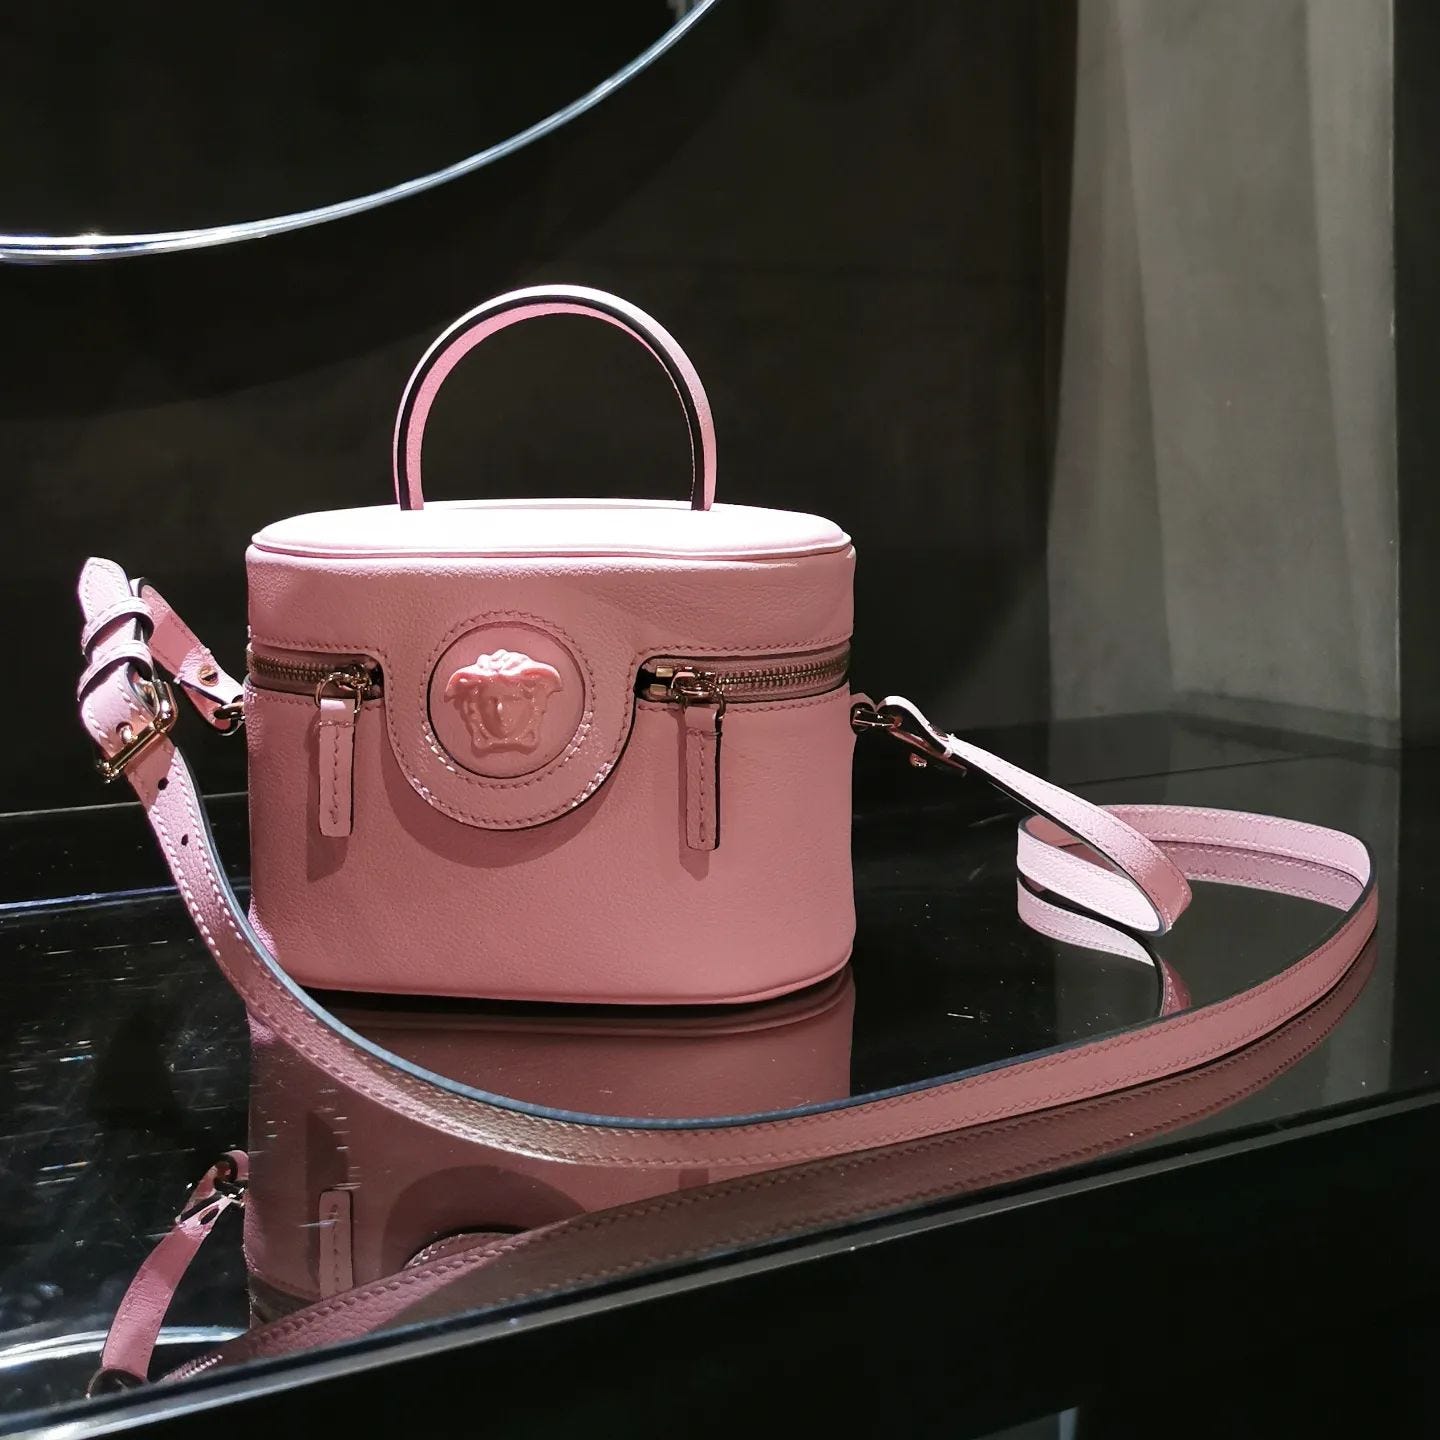 PASTEL POWER: the @versace Spring/Summer 22 collection introduces new silhouettes to the handbag line. Pick up the #VersaceLaMedusa handbag in playful pink on genteroma.com and in store at Via del Babuino, 77.

#GenteRoma #Versace #SS22